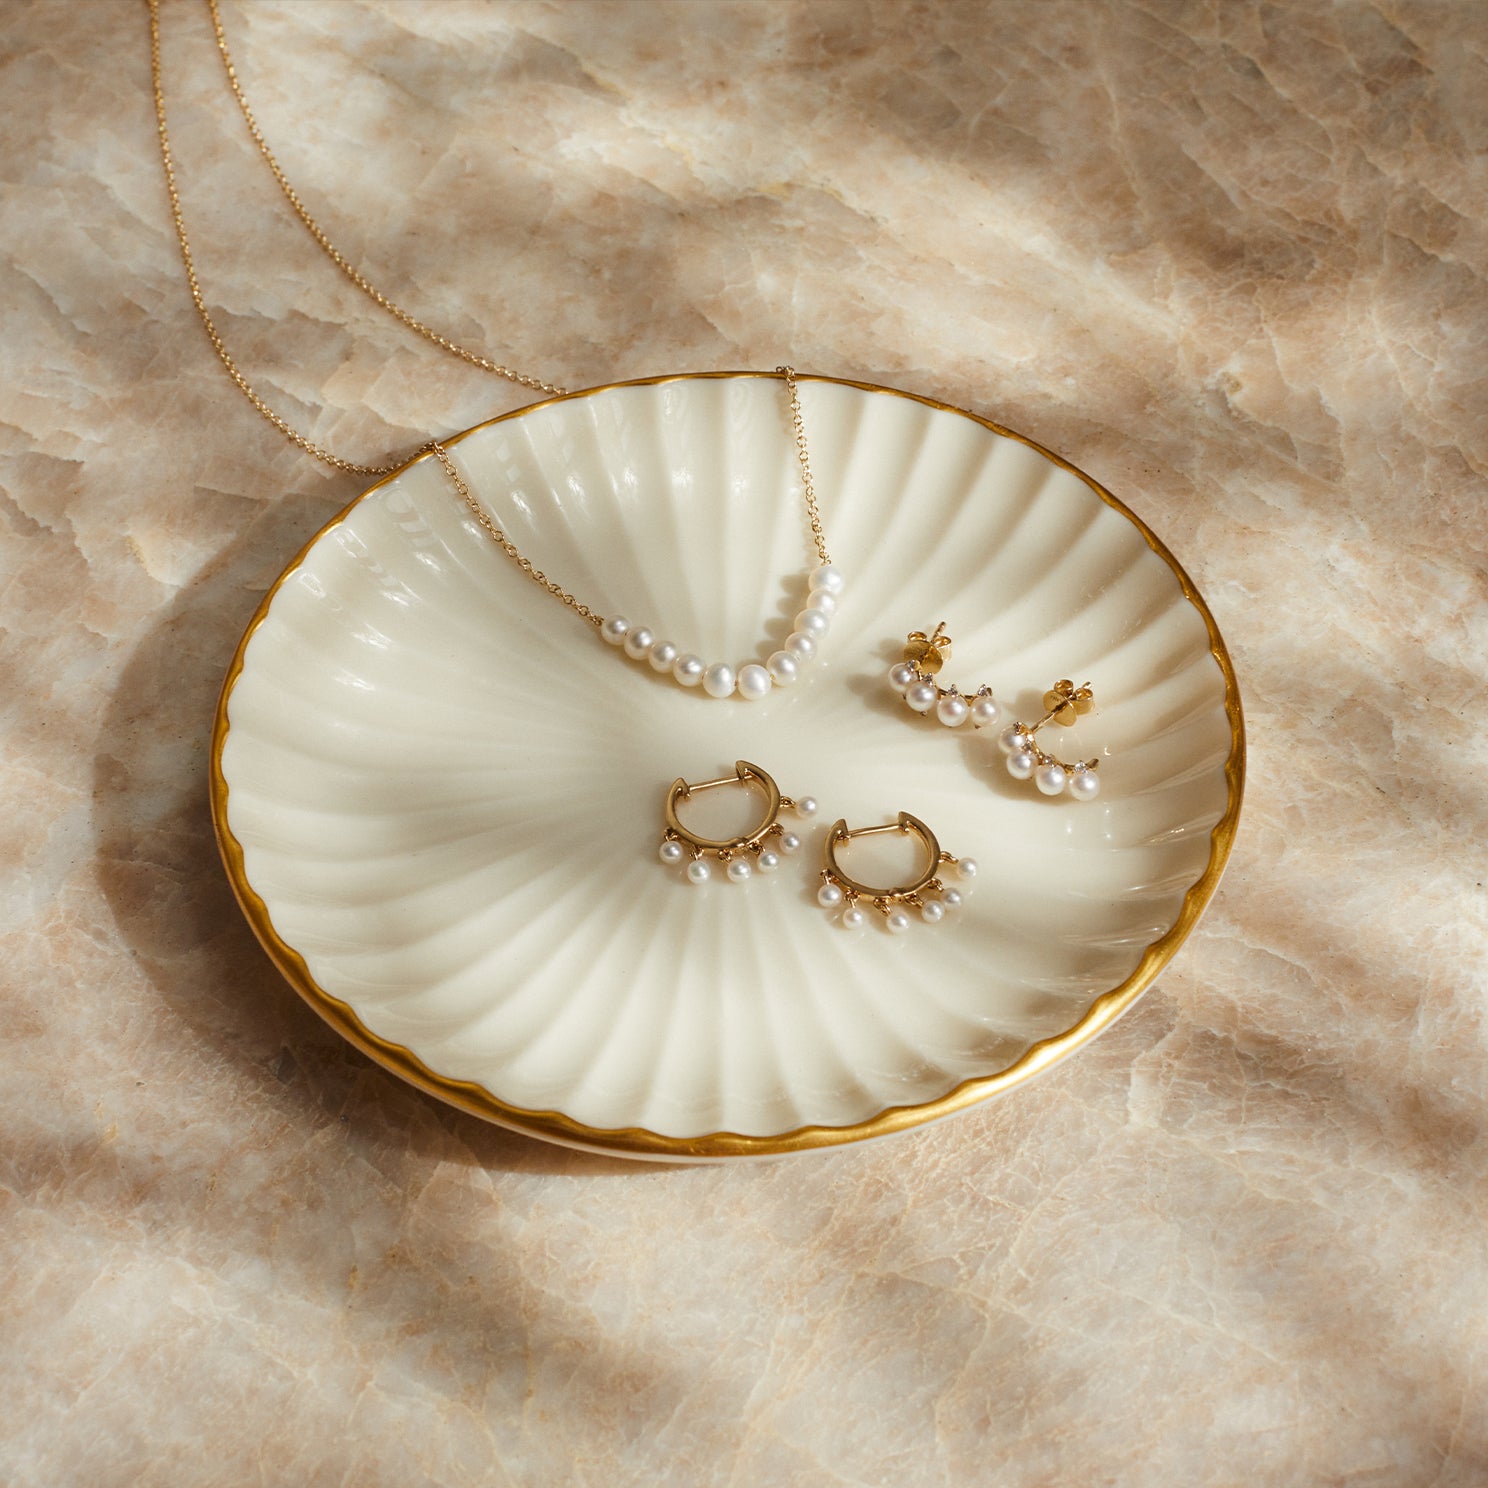 Diamond & Pearl Arc Stud Earring in 14k yellow gold laying on top of white dish next to gold mini huggies with pearls and pearl necklace